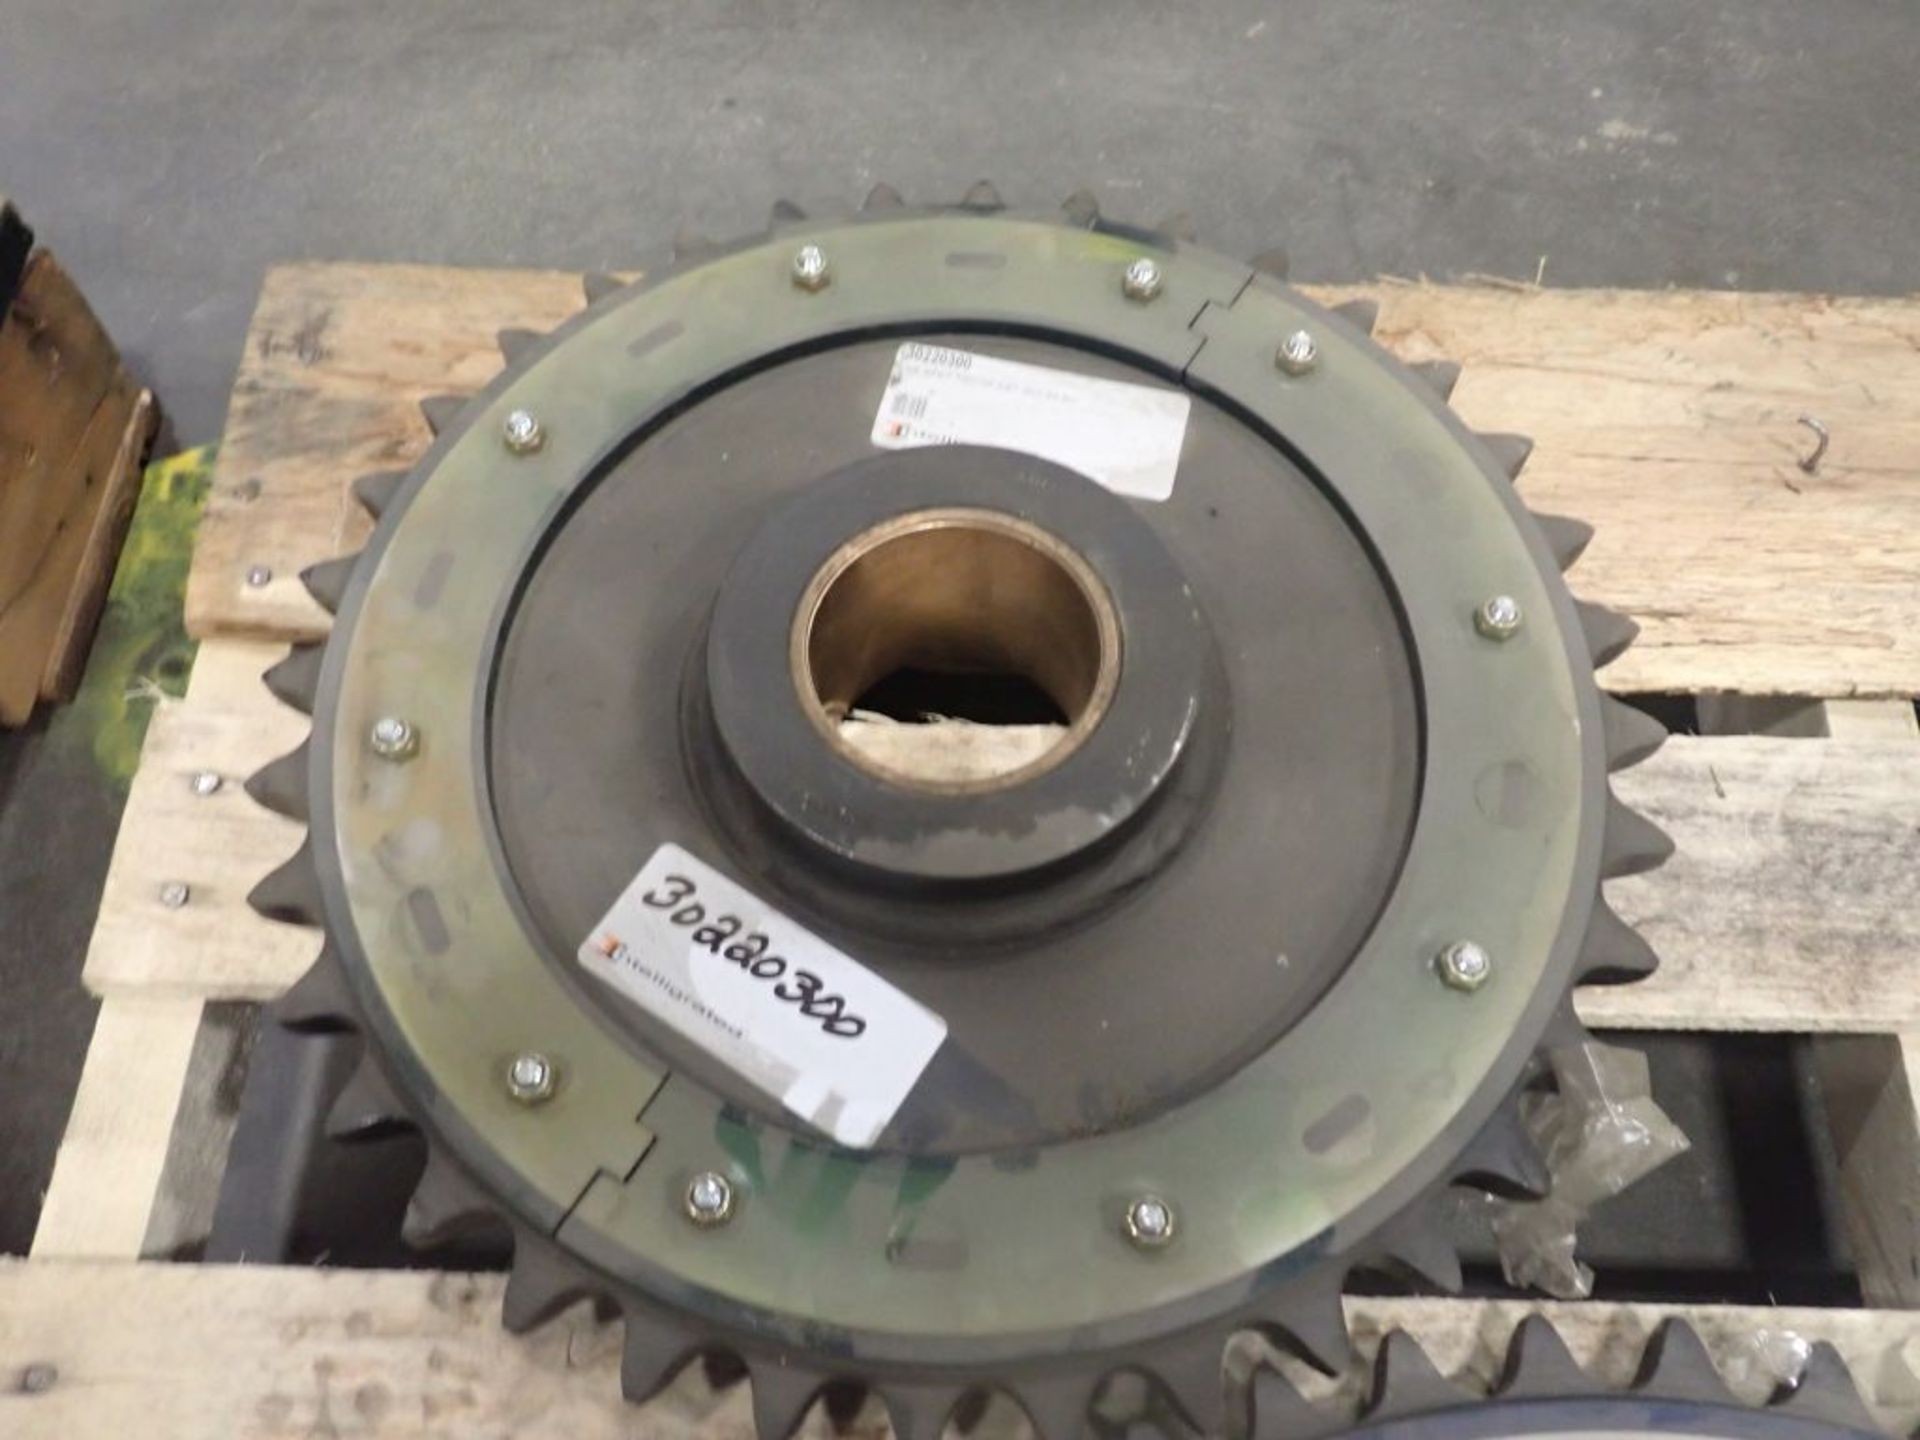 Lot of (6) Sprockets - Tag: 222311; Lot Loading Fee: $30 - Image 11 of 12